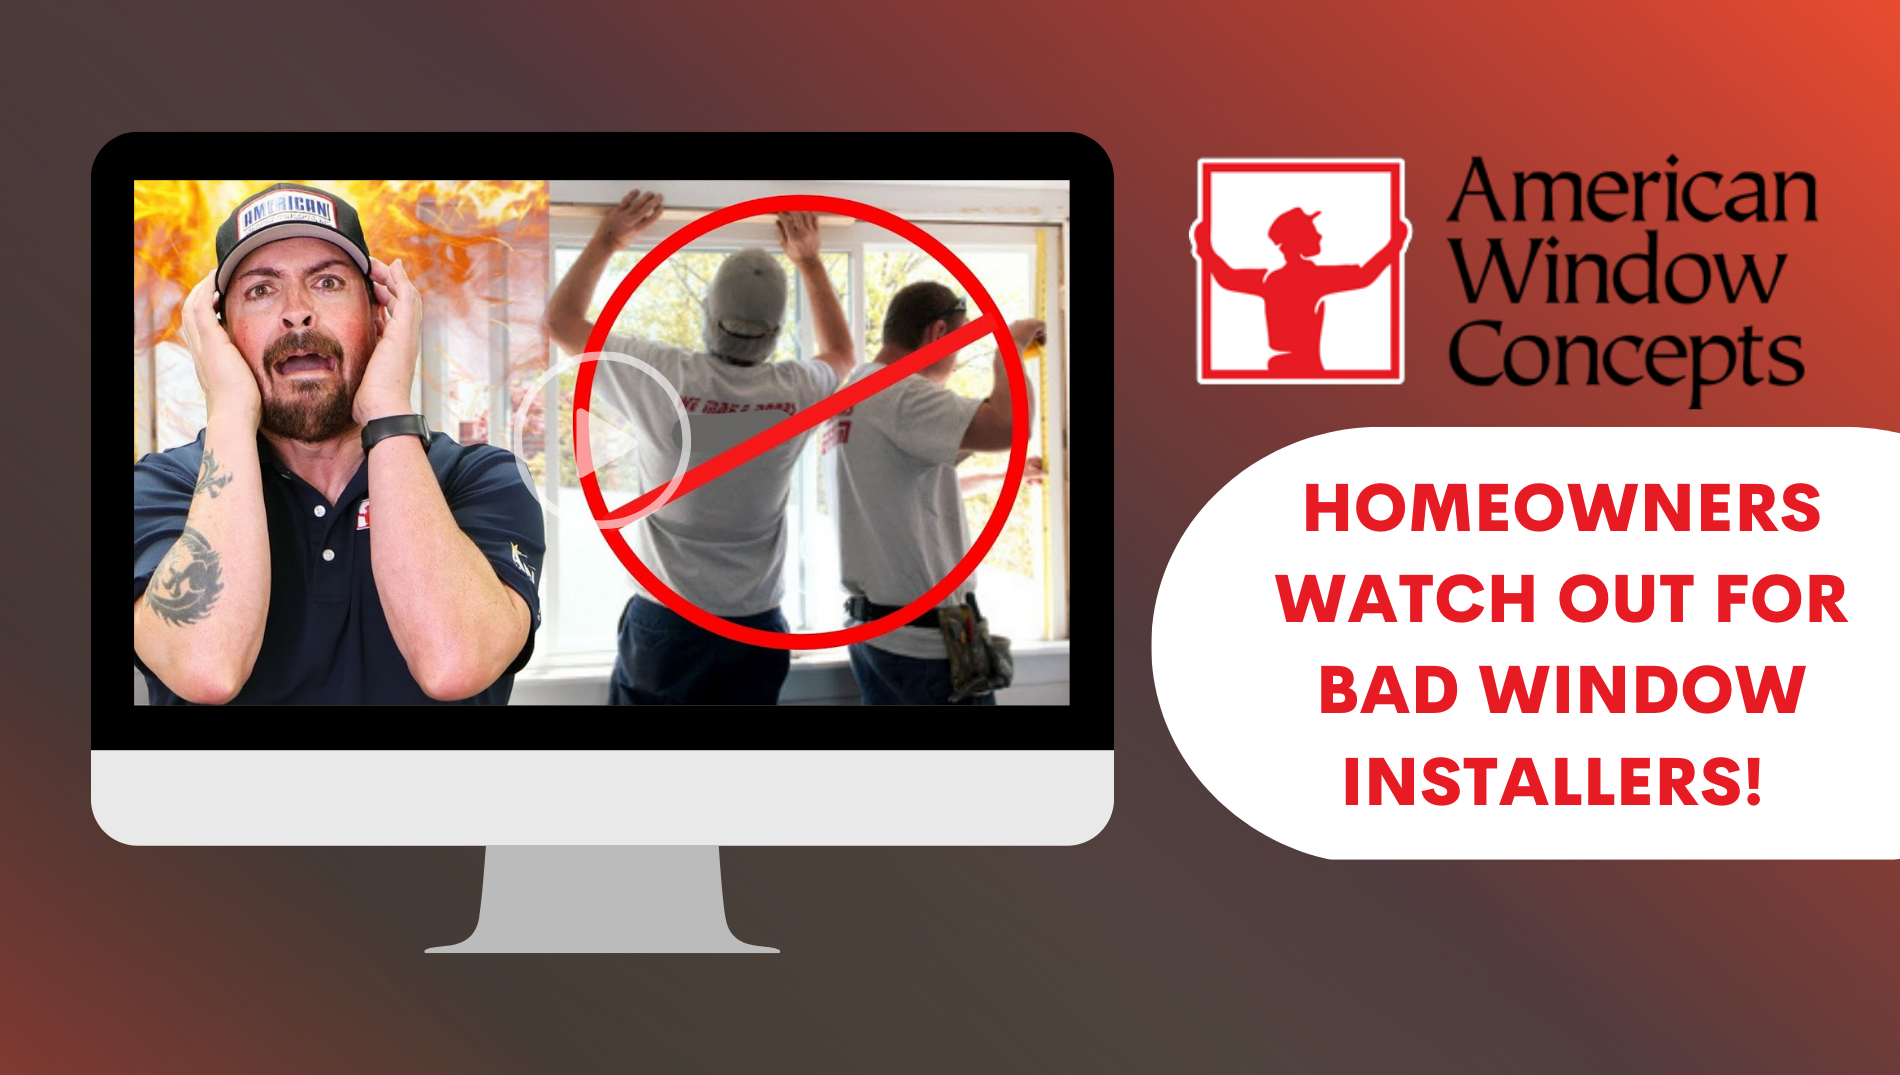 Homeowners Watch Out for Bad Window Installers!